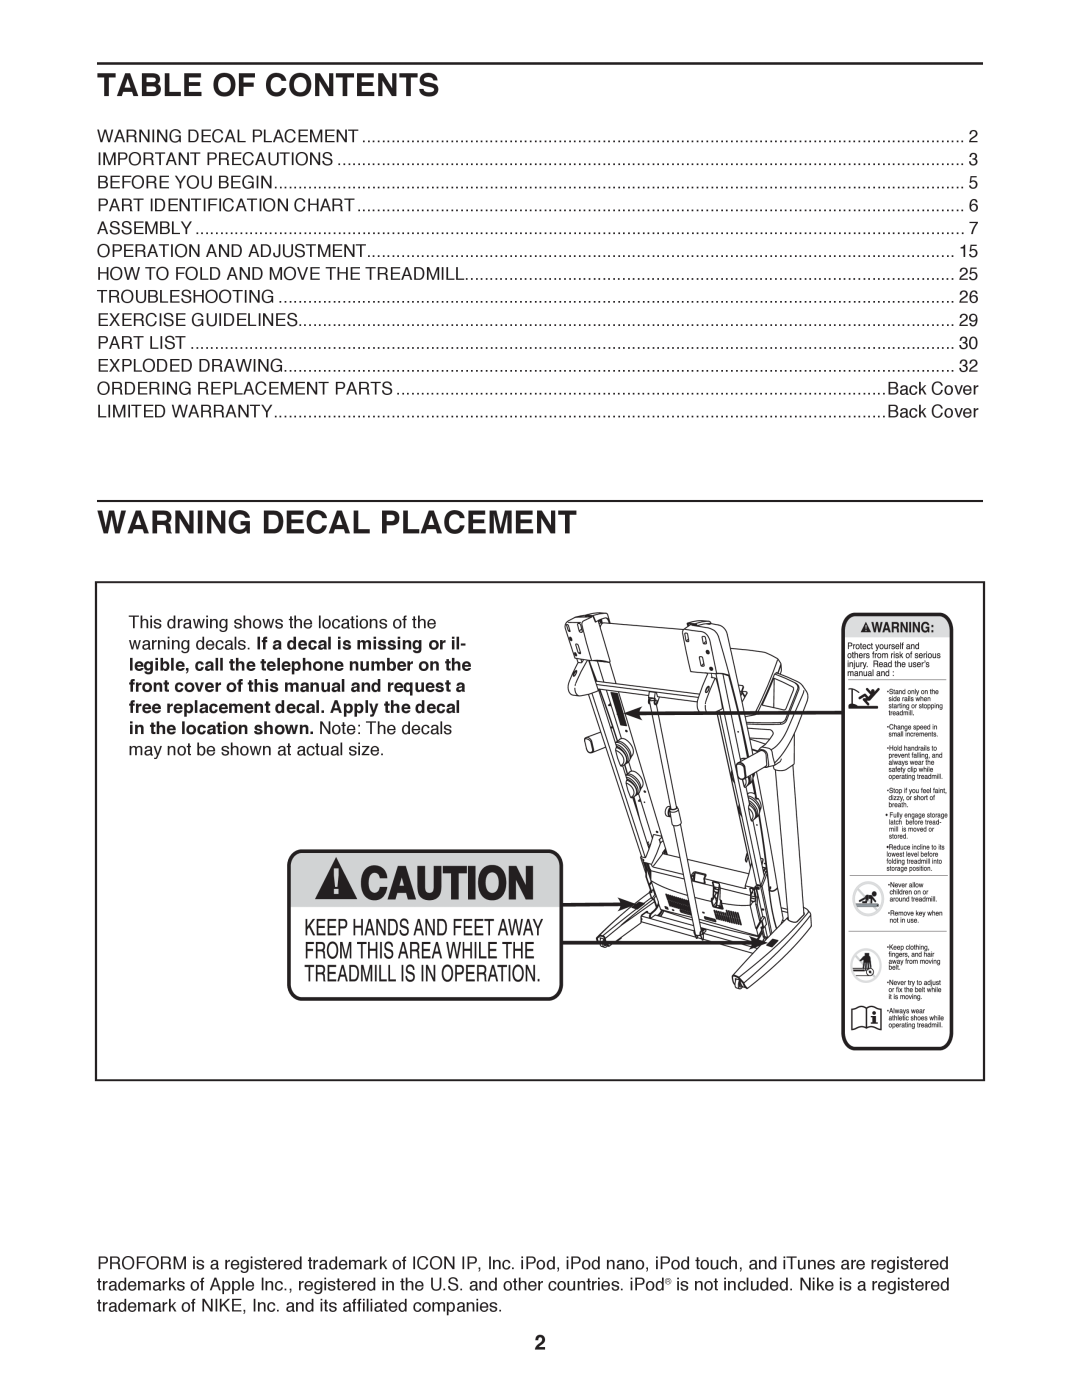 ProForm 795 user manual Table Of Contents, Warning Decal Placement 